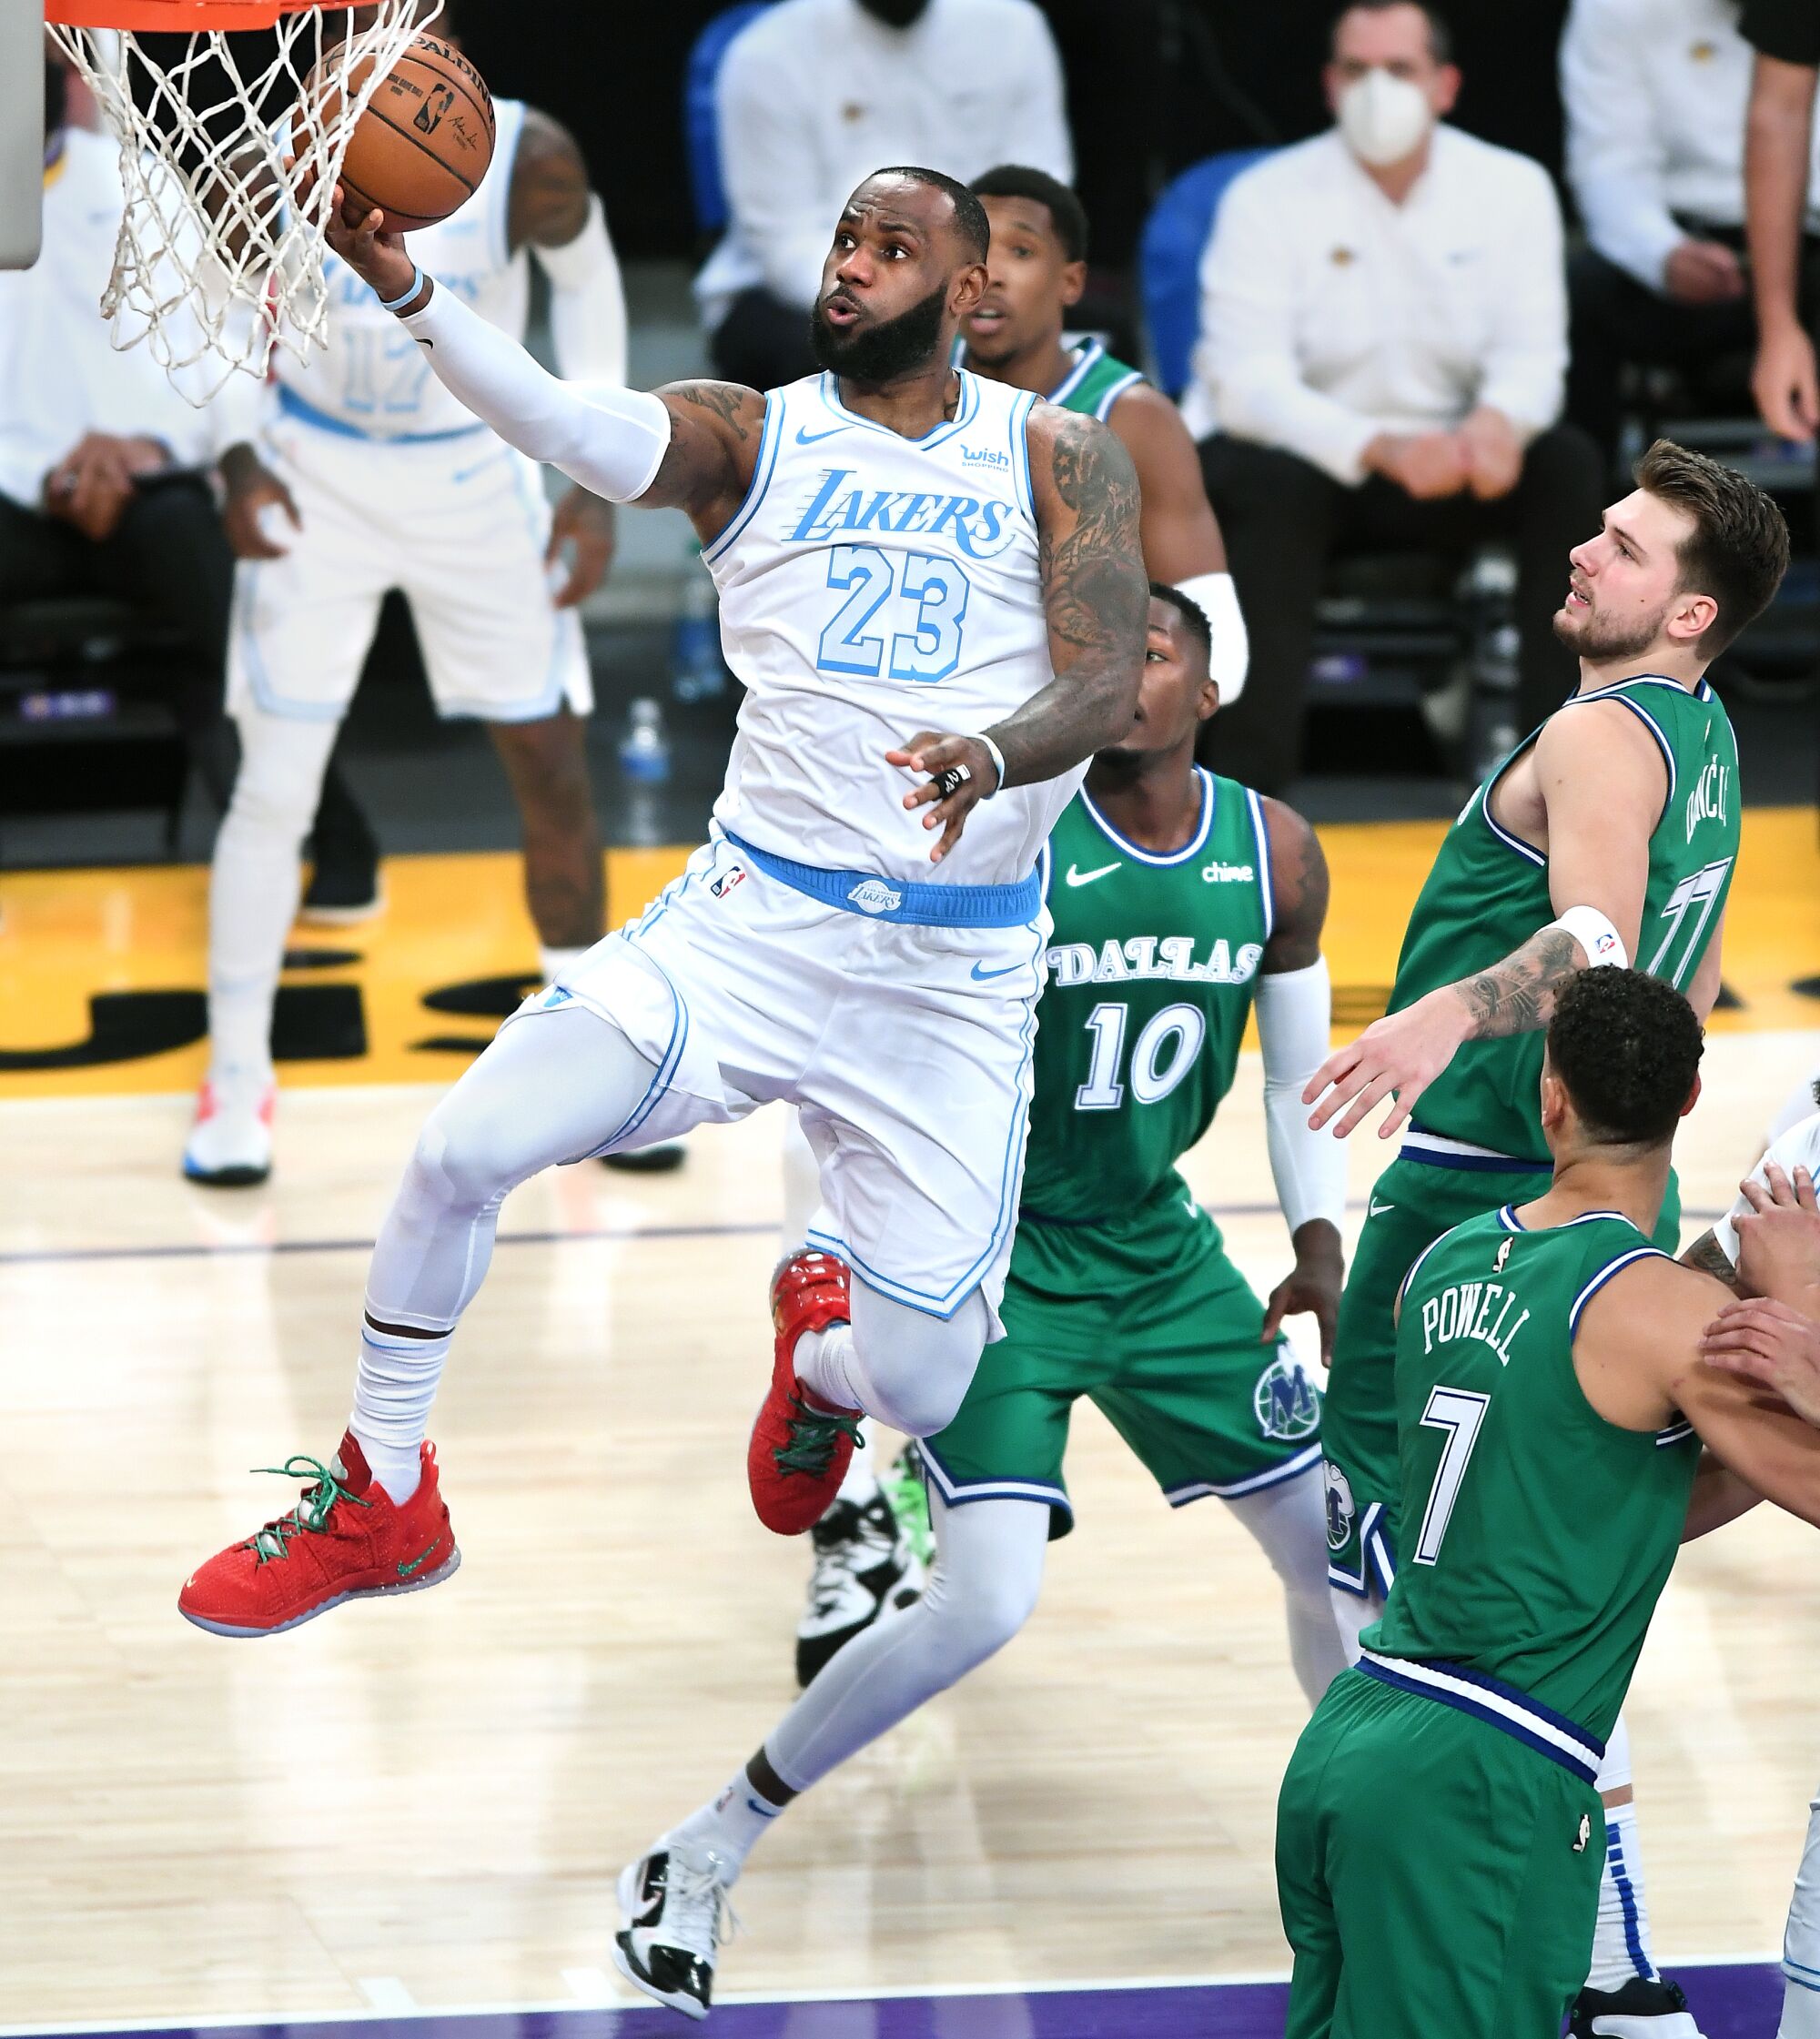 Lakers star LeBron James drives through the Mavericks defense to score during the first quarter.